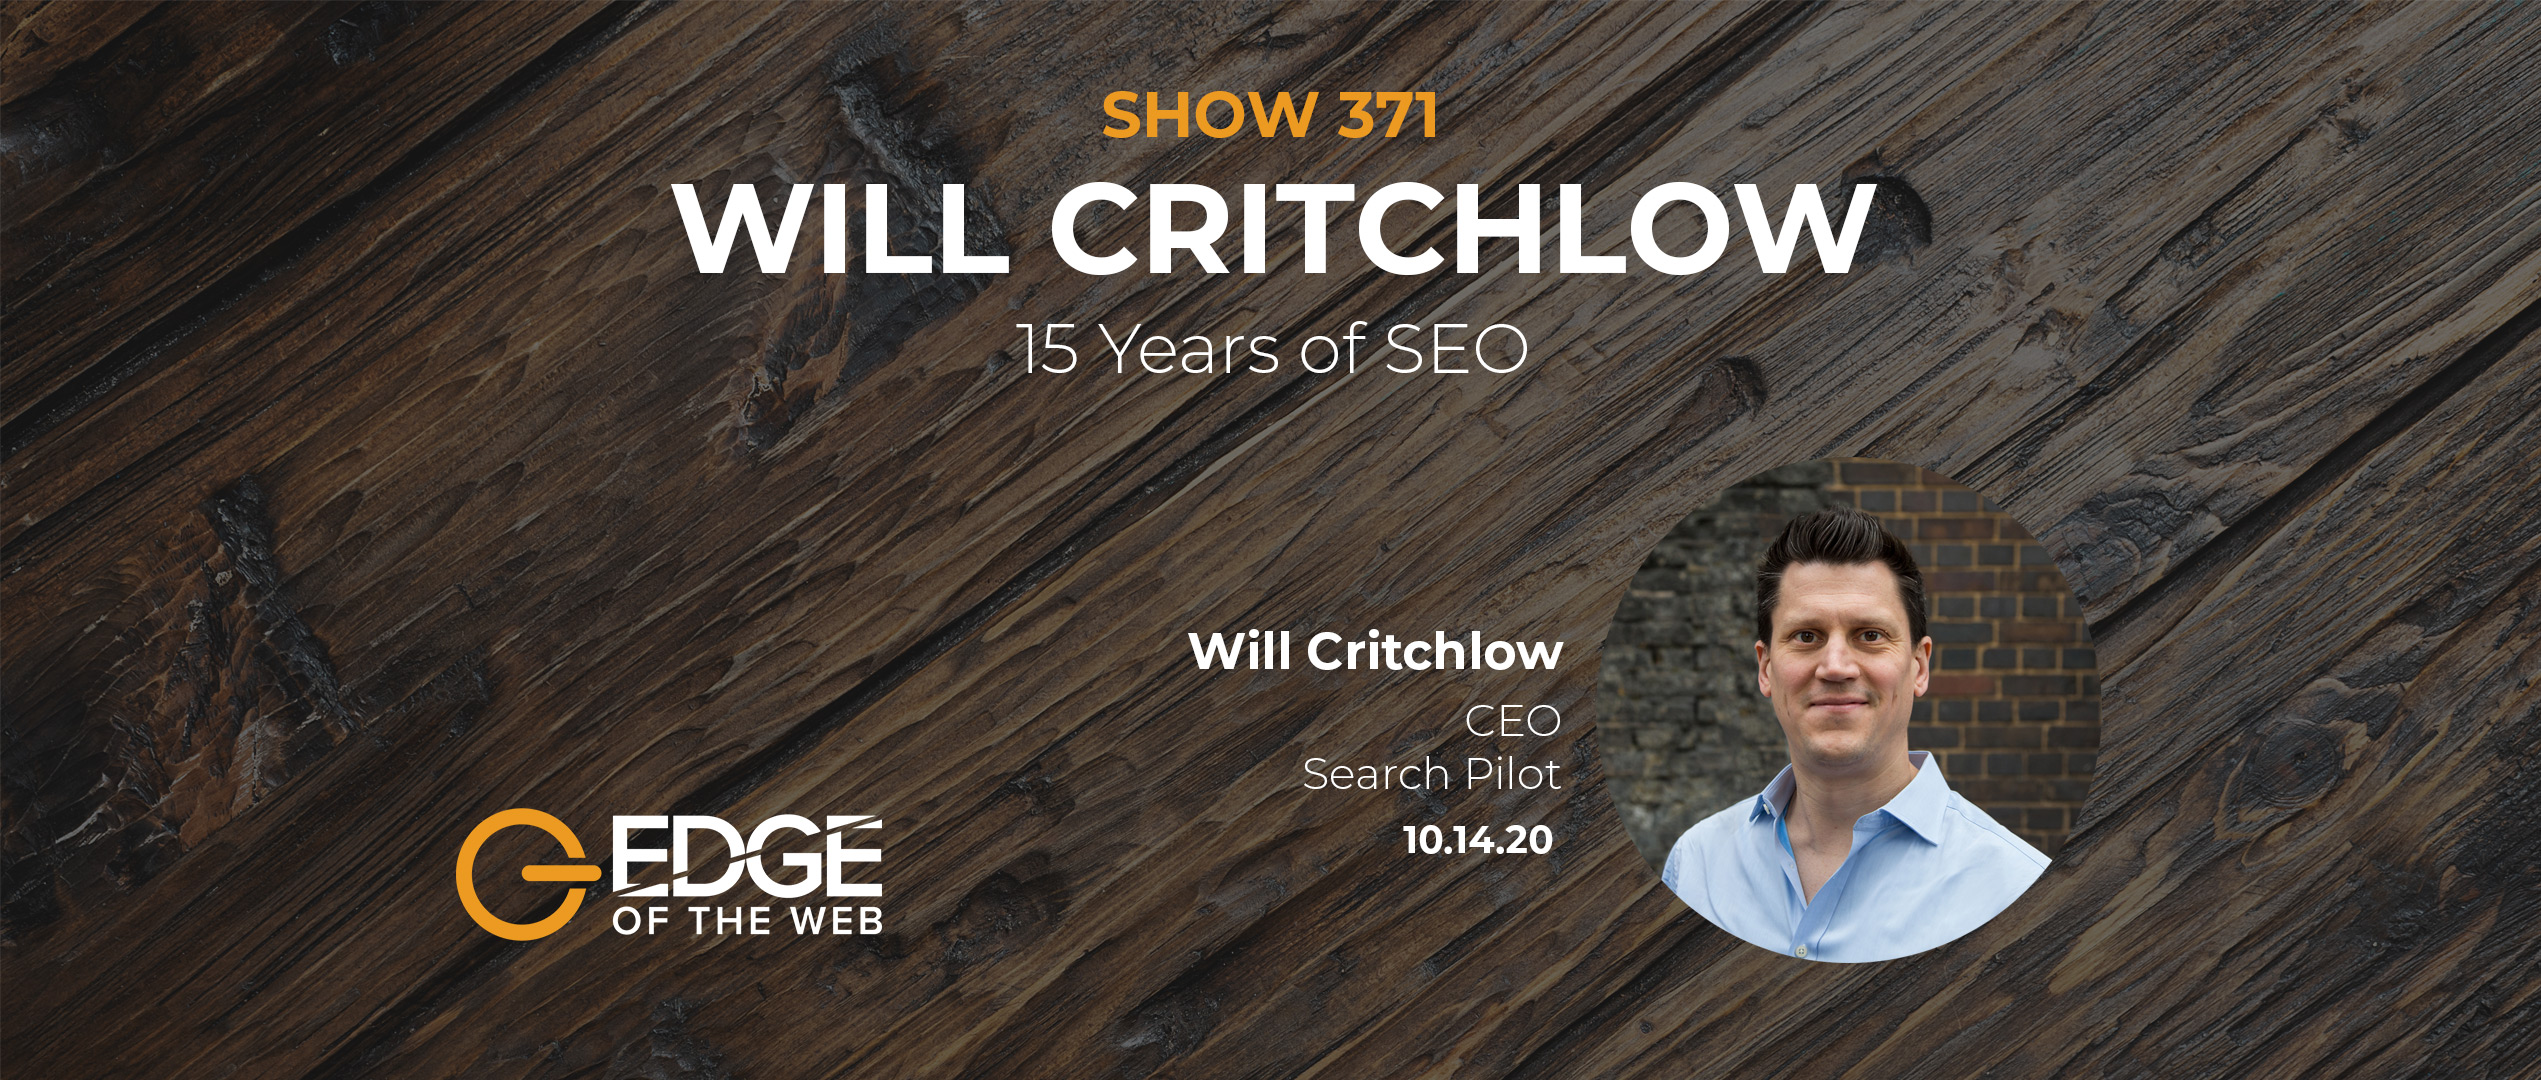 EP 371: 15 Years of SEO with Will Critchlow